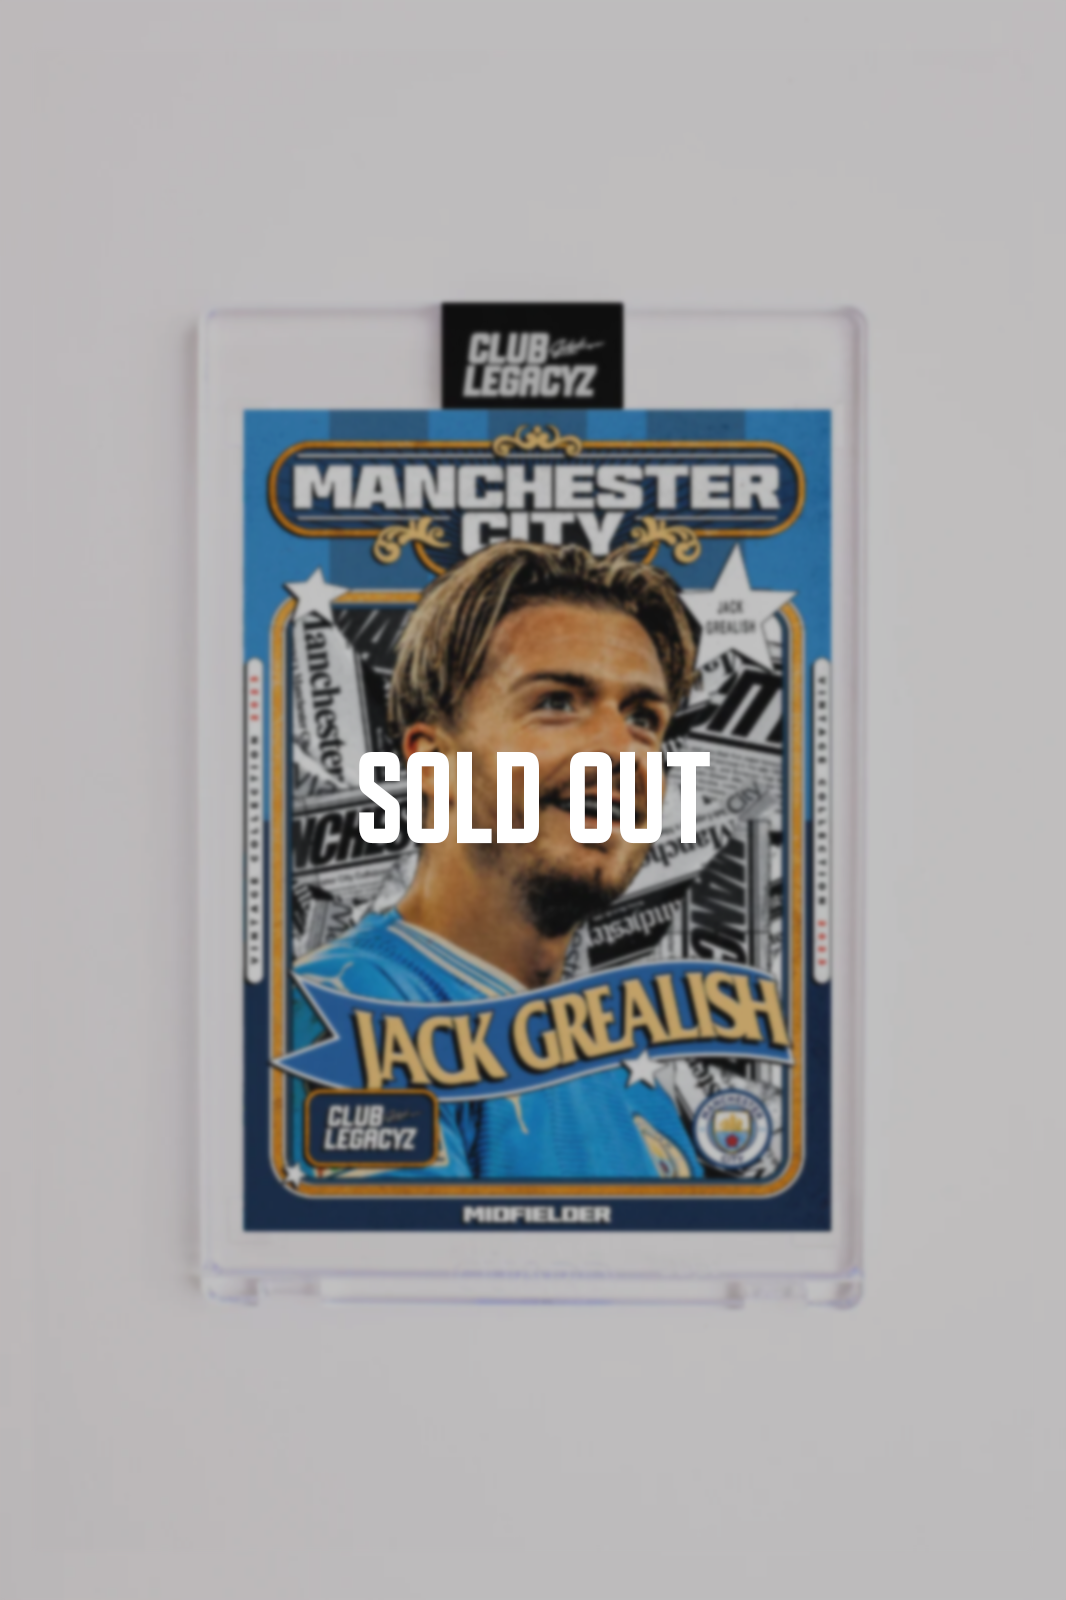 Manchester City - Jack Grealish Retro Icon limited to 100